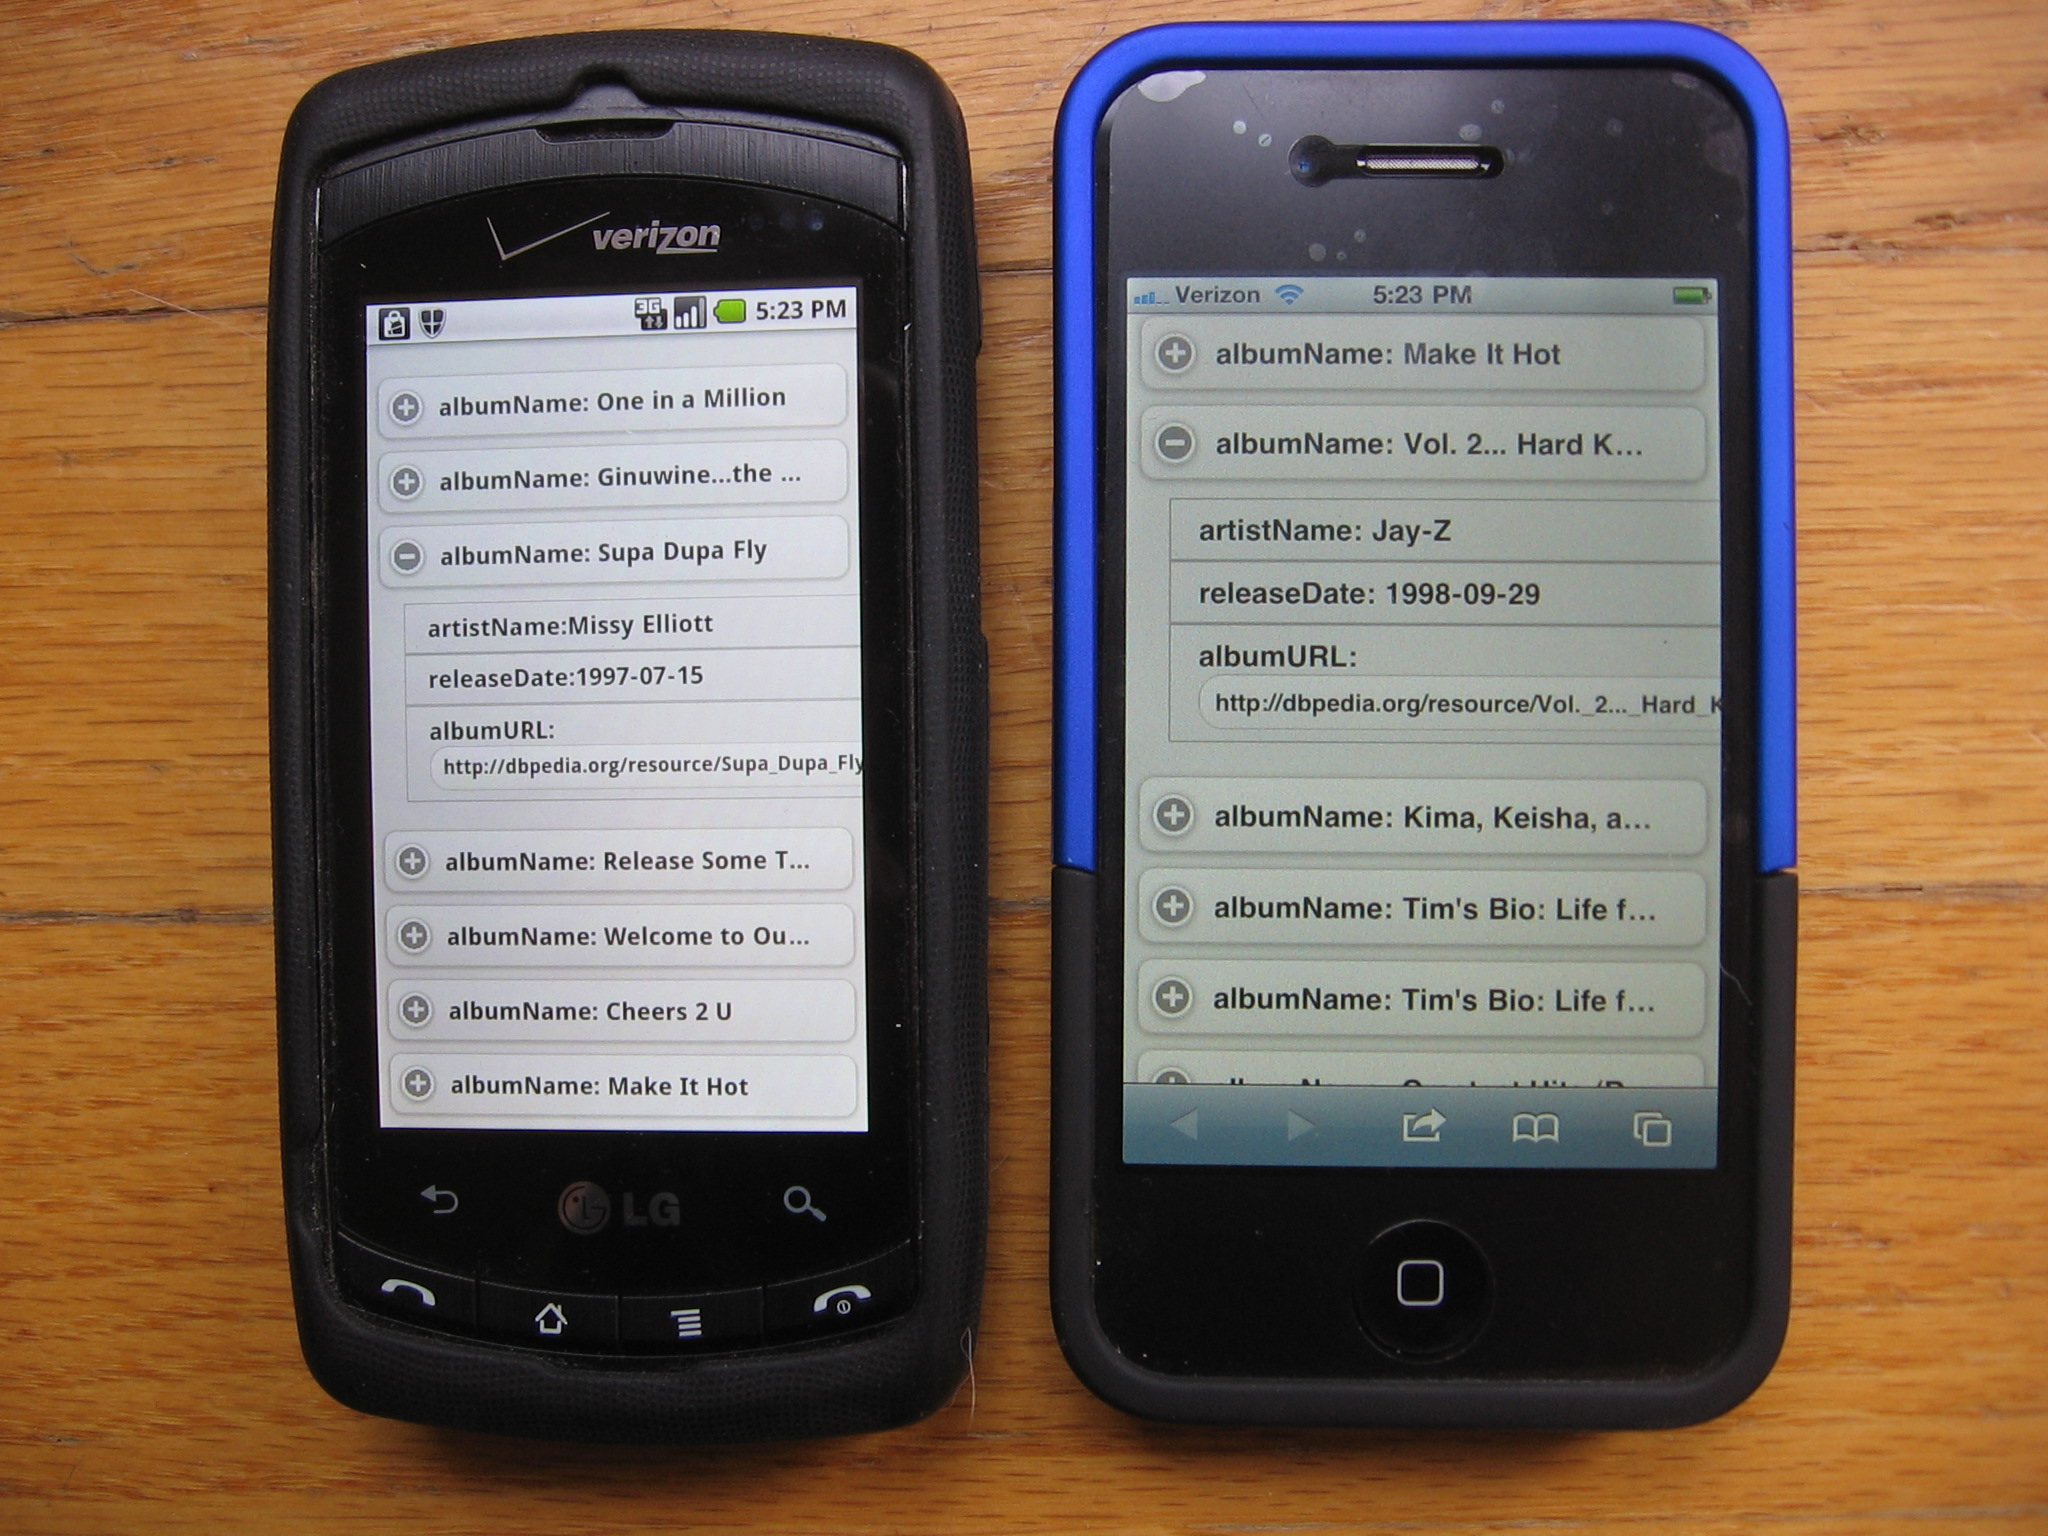 Android LG Ally and iPhone showing SPARQL results